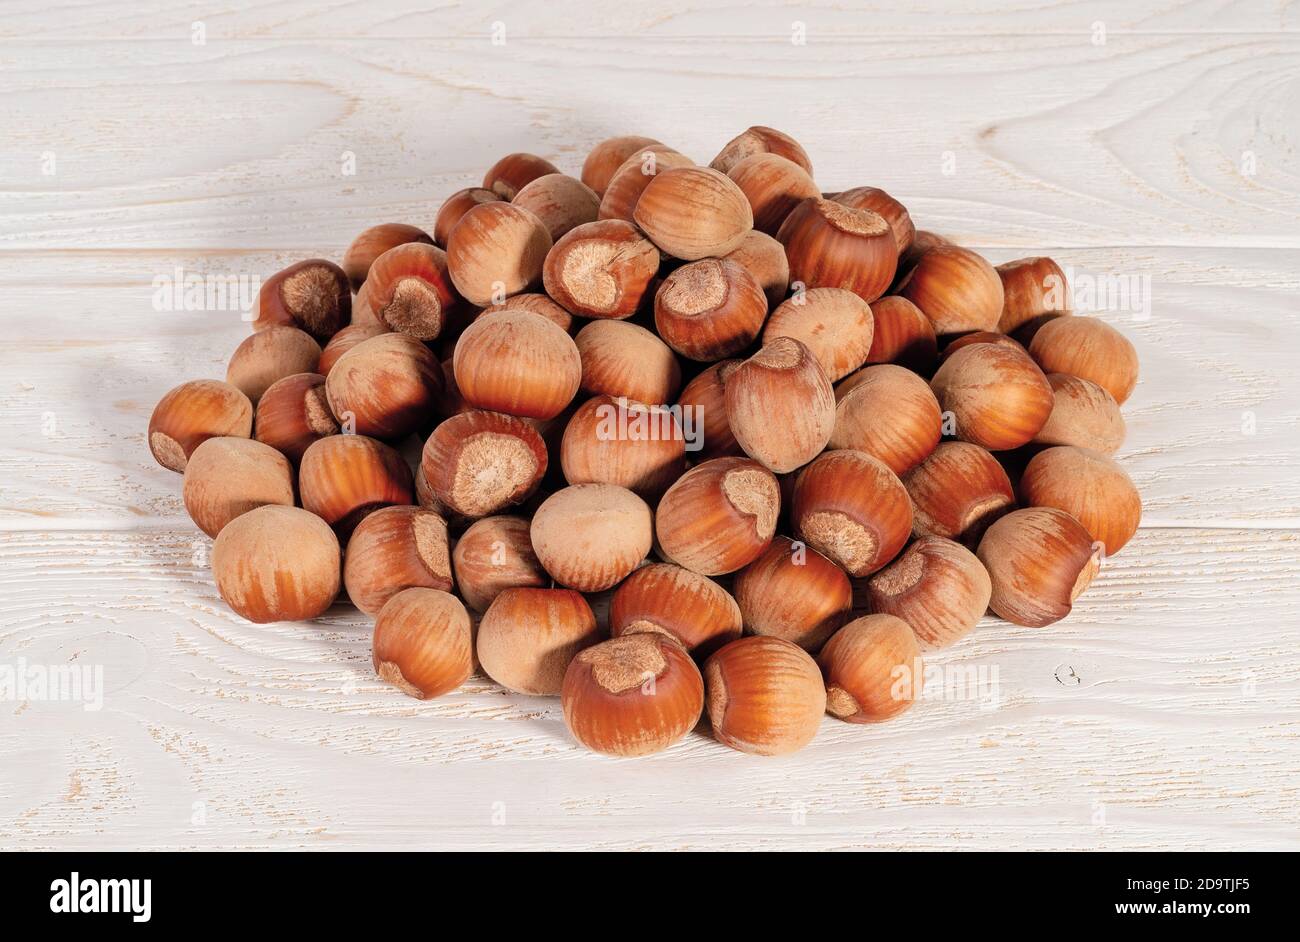 Pile of unpeeled hazelnuts over white wood table. Nuts as an antioxidant and protein source for ketogenic diet and vegetarianism. Top view. Stock Photo